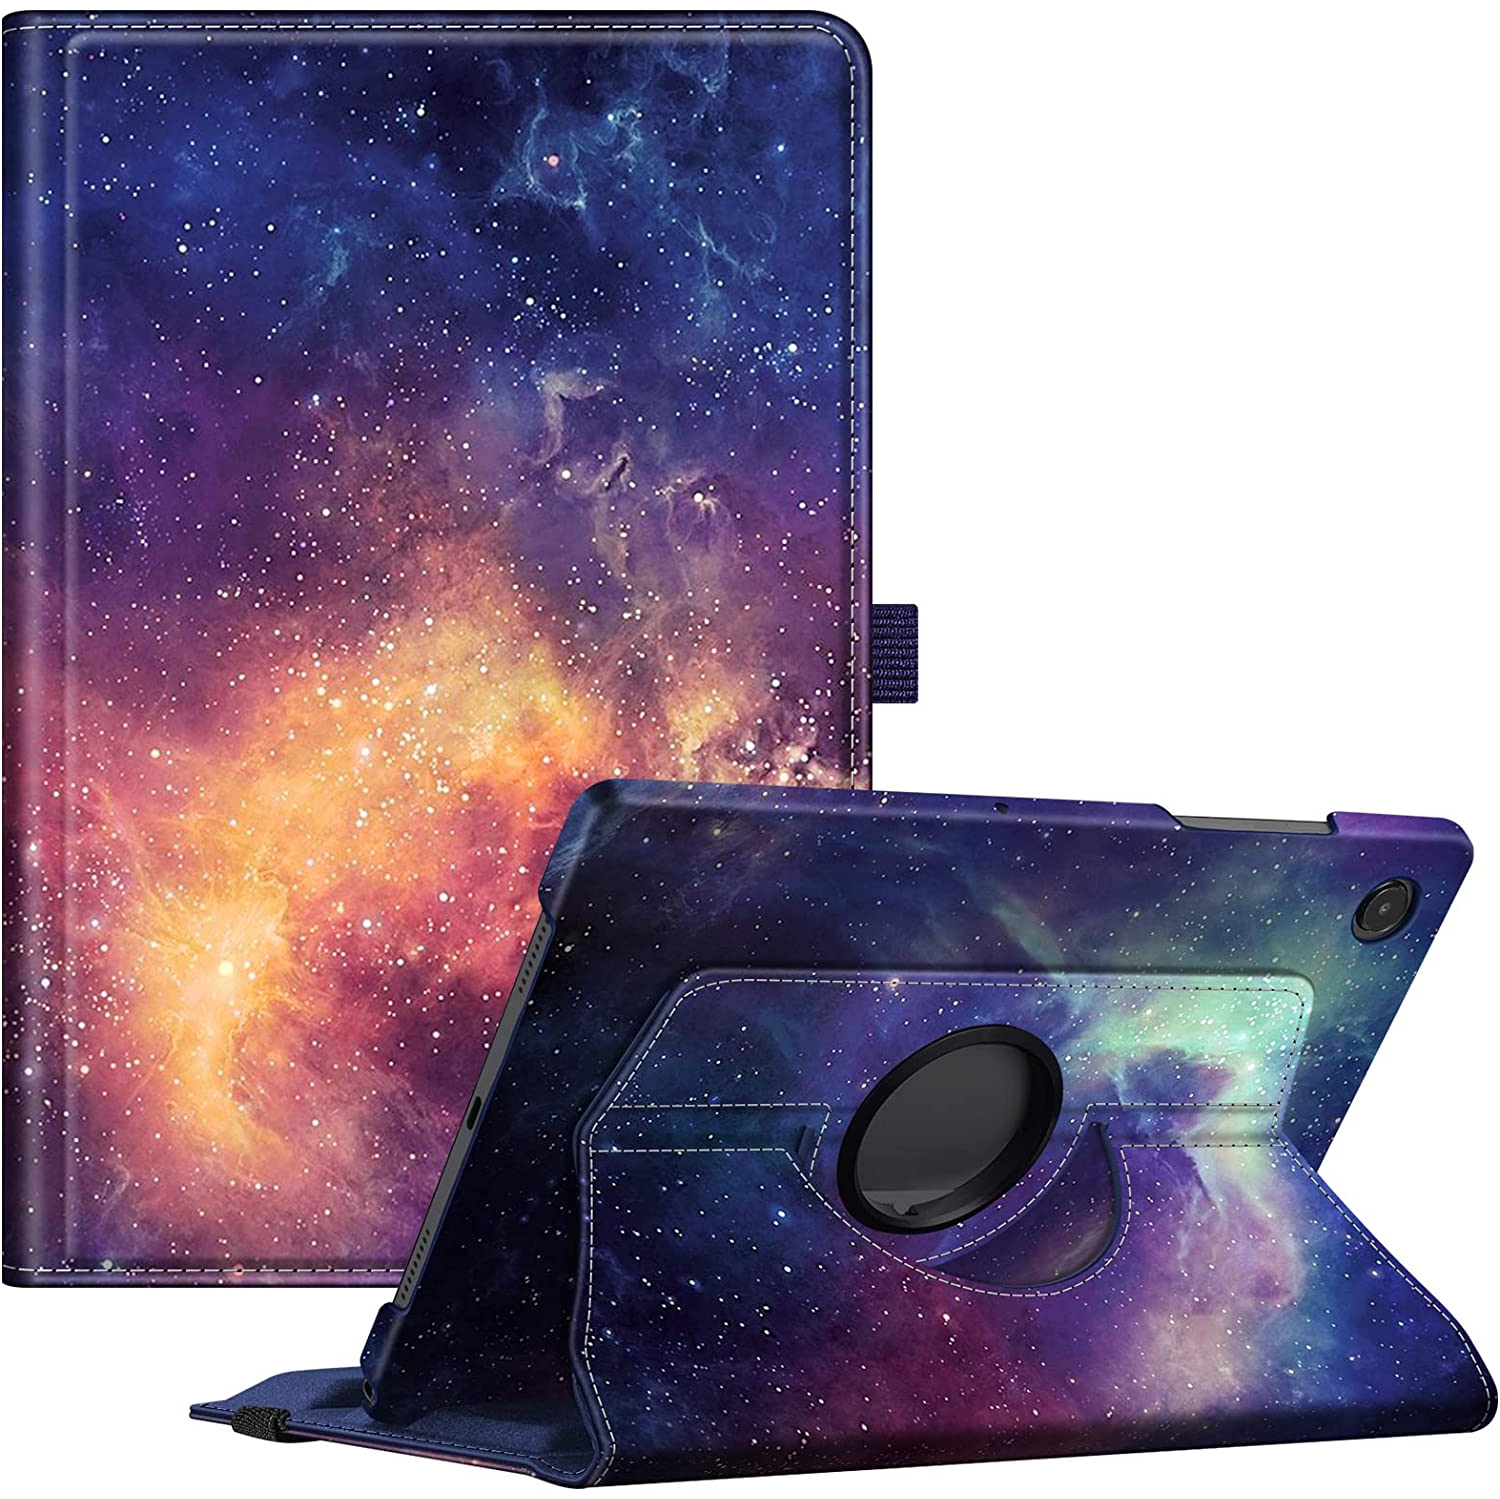 F Rotating Case for Samsung Galaxy Tab A8 10.5 Inch 2022 Model (SM-X200/X205/X207), 360 Degree Swiveling Stand Protective Cover with Auto Sleep/Wake, Galaxy